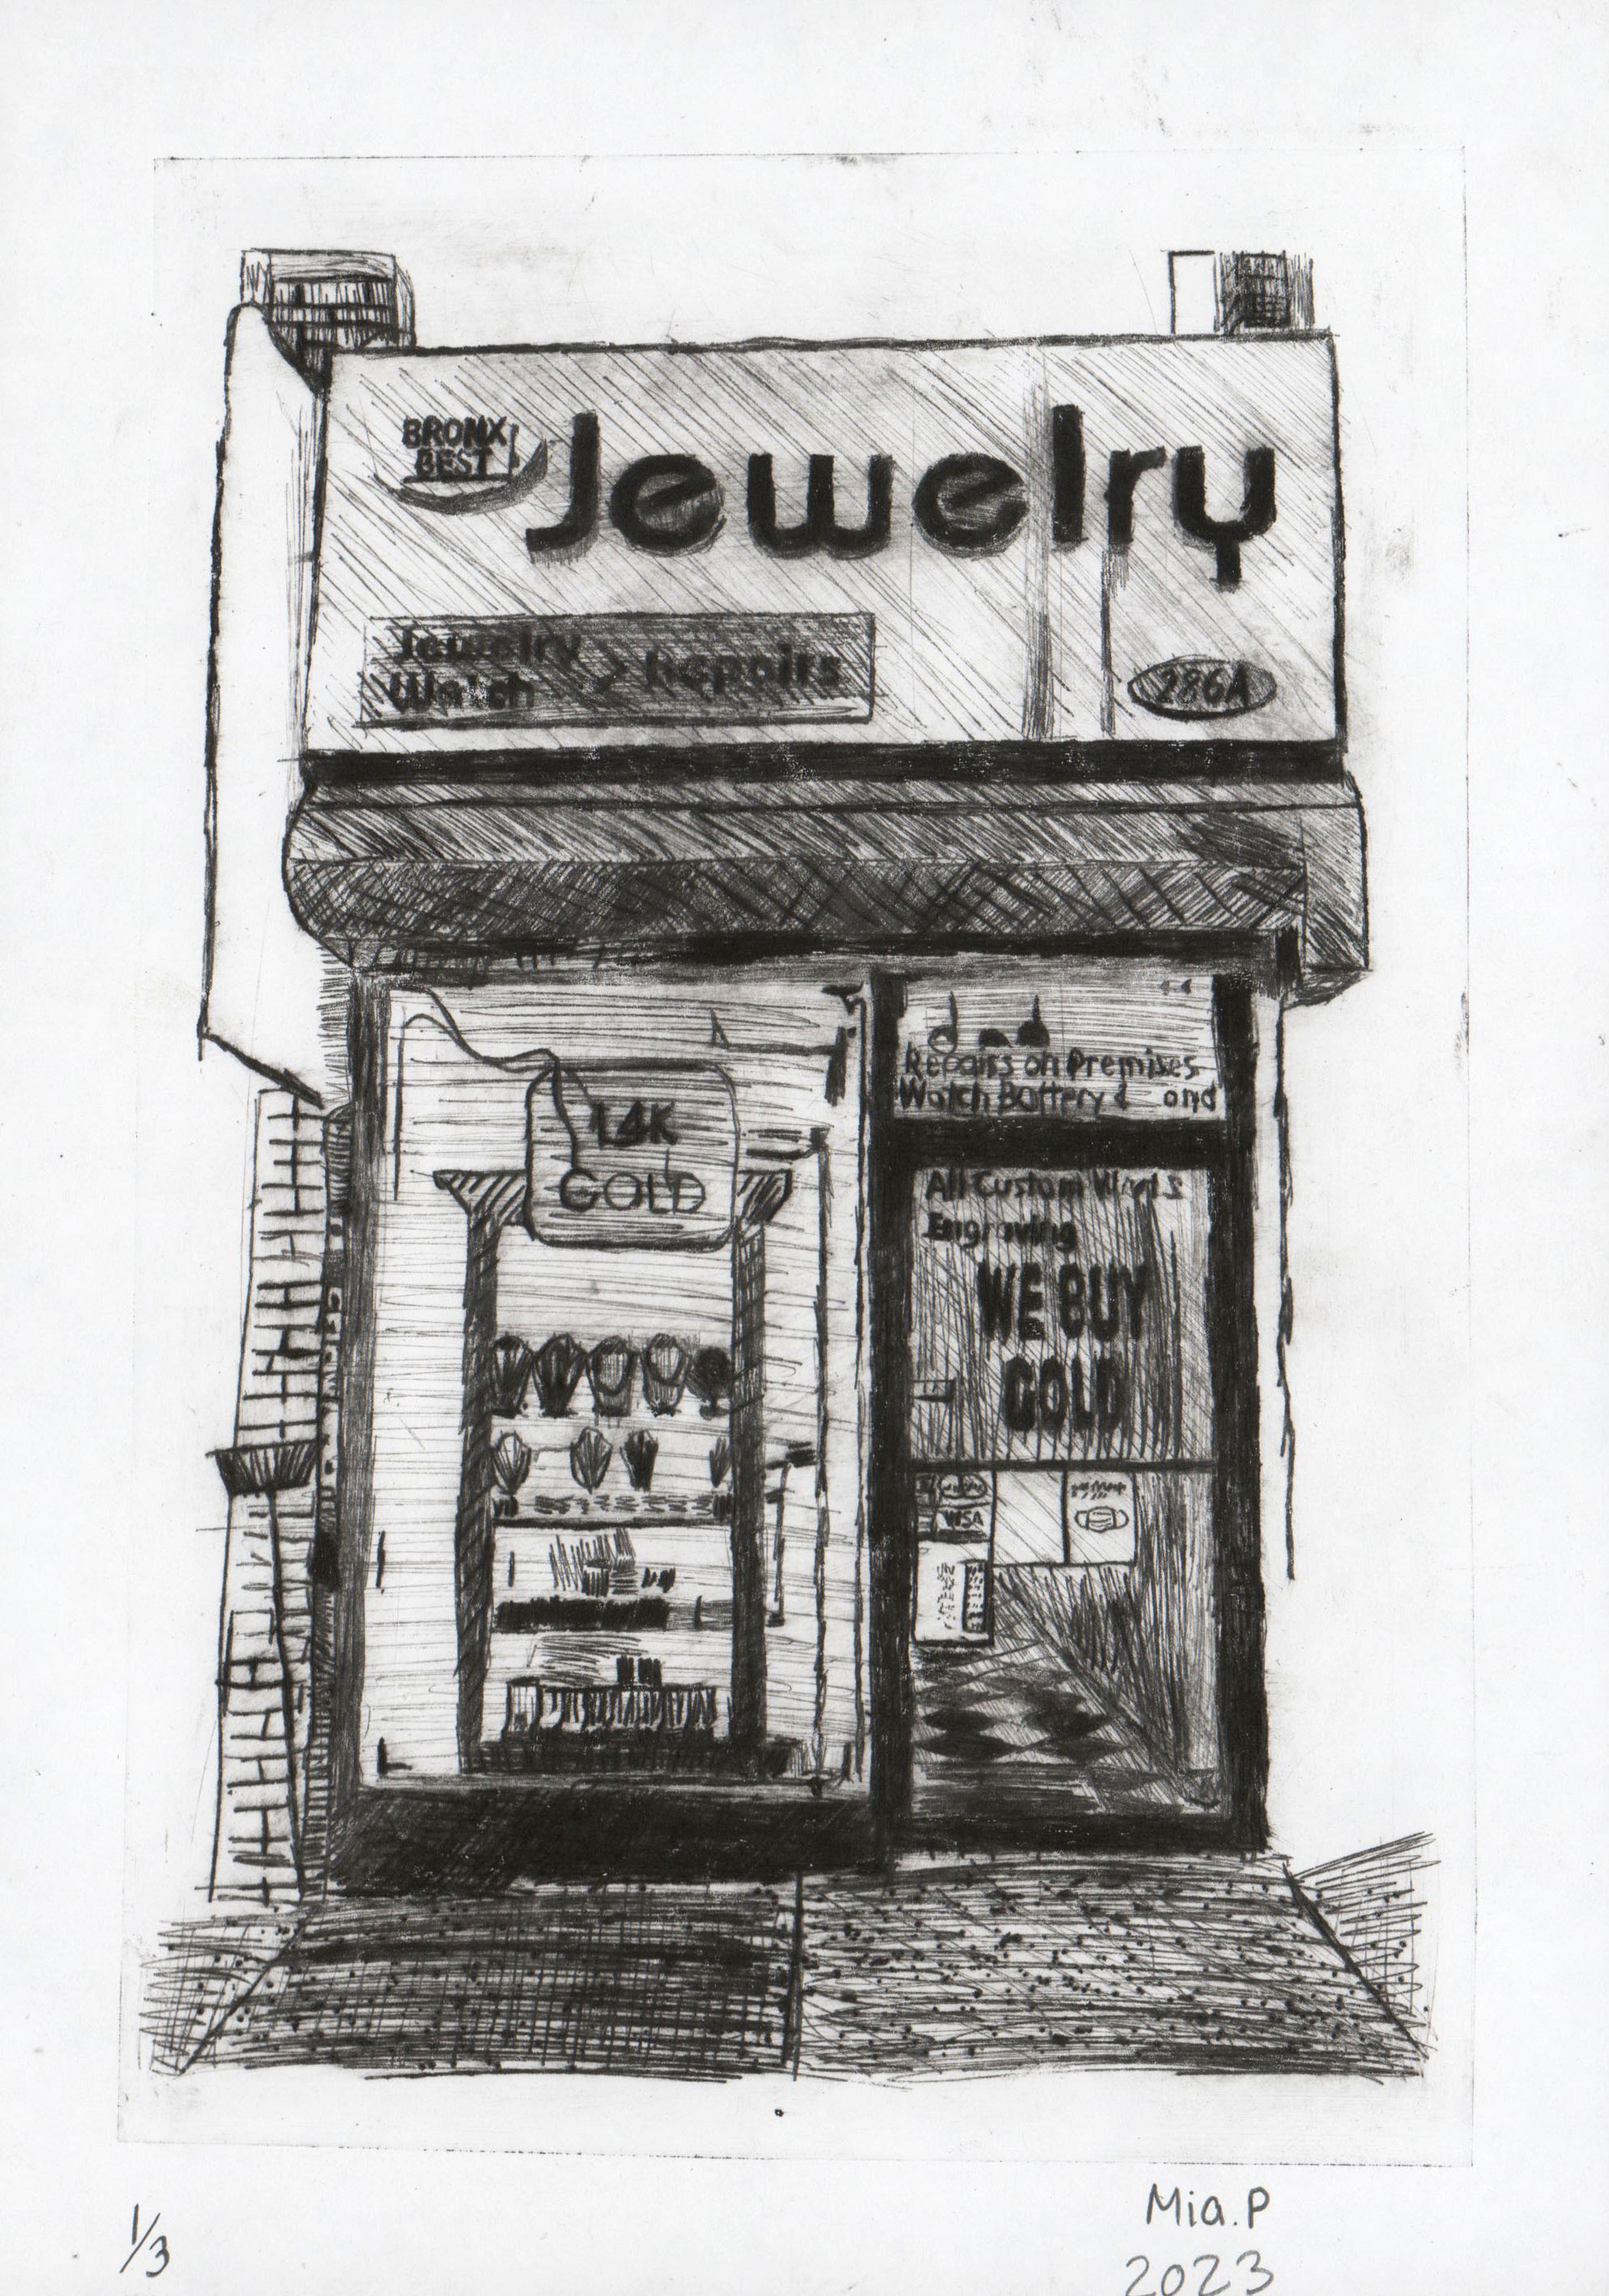 This crosshatched, black-and-white Drypoint print depicts the front of a jewelry store. The large rectangular sign above the shutter awning says Bronx Best Jewelry. A smaller sign below says Jewelry Watch Repairs. The storefront window to the left shows a row of neck mannequins adorned with necklaces. The glass door to the right has the words We Buy Gold written prominently on the glass. A diagonally oriented black and white checkerboard floor recedes behind the glass door.